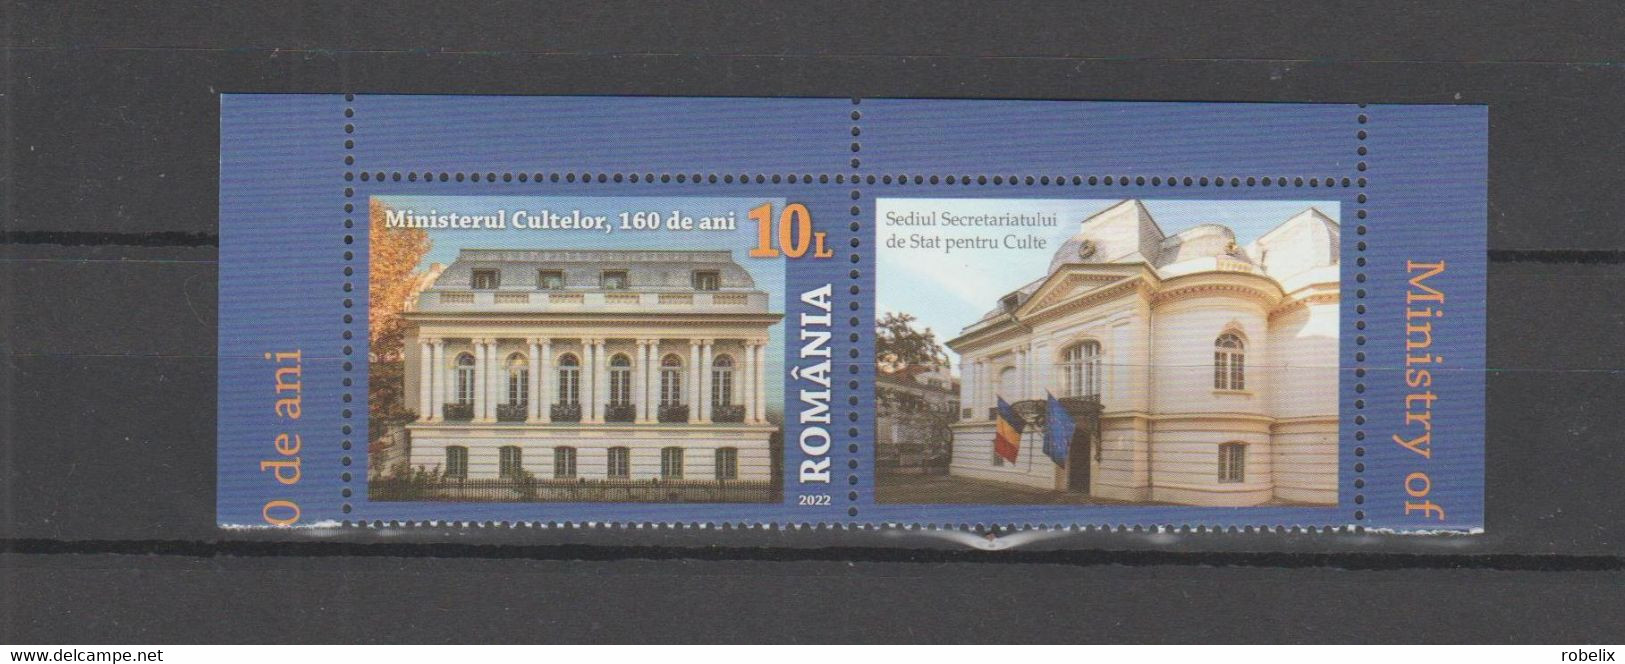 ROMANIA  2022  Ministry Of Religious Affairs, 160 Years - Set Of 1 Stamp With Label  MNH** - Unused Stamps